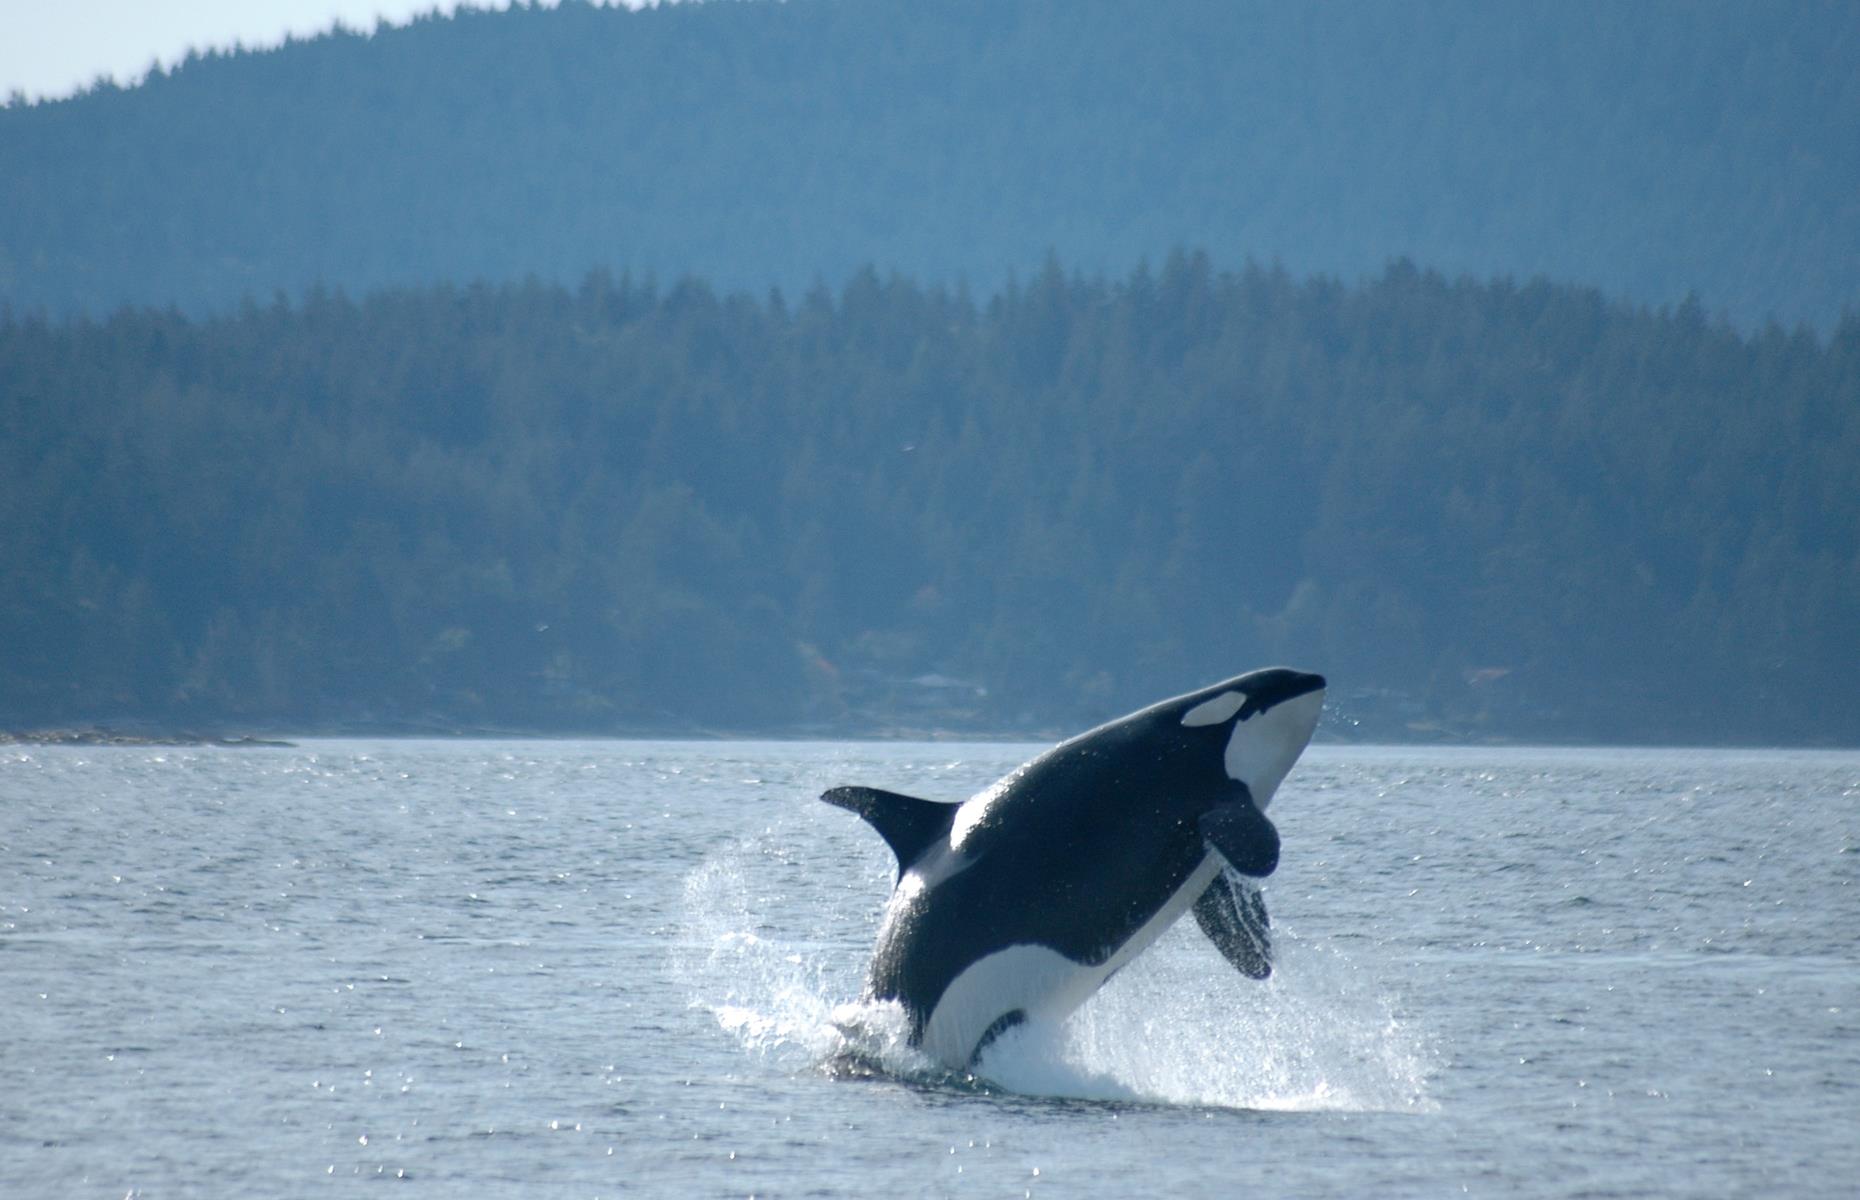 <p>The waters that surround the <a href="https://www.visitsanjuans.com/">San Juan Islands</a>, northwest of Seattle, are home to resident orcas and other pods that visit in summer. Several companies including <a href="http://www.outdoorodysseys.com">Outdoor Odysseys</a> run kayaking day tours or overnight trips for a chance to see the striking whales up close. Even if you don’t see any orcas, you’re likely to see seals, dolphins, bald eagles and otters as you paddle by driftwood beaches and pine-studded shorelines.</p>